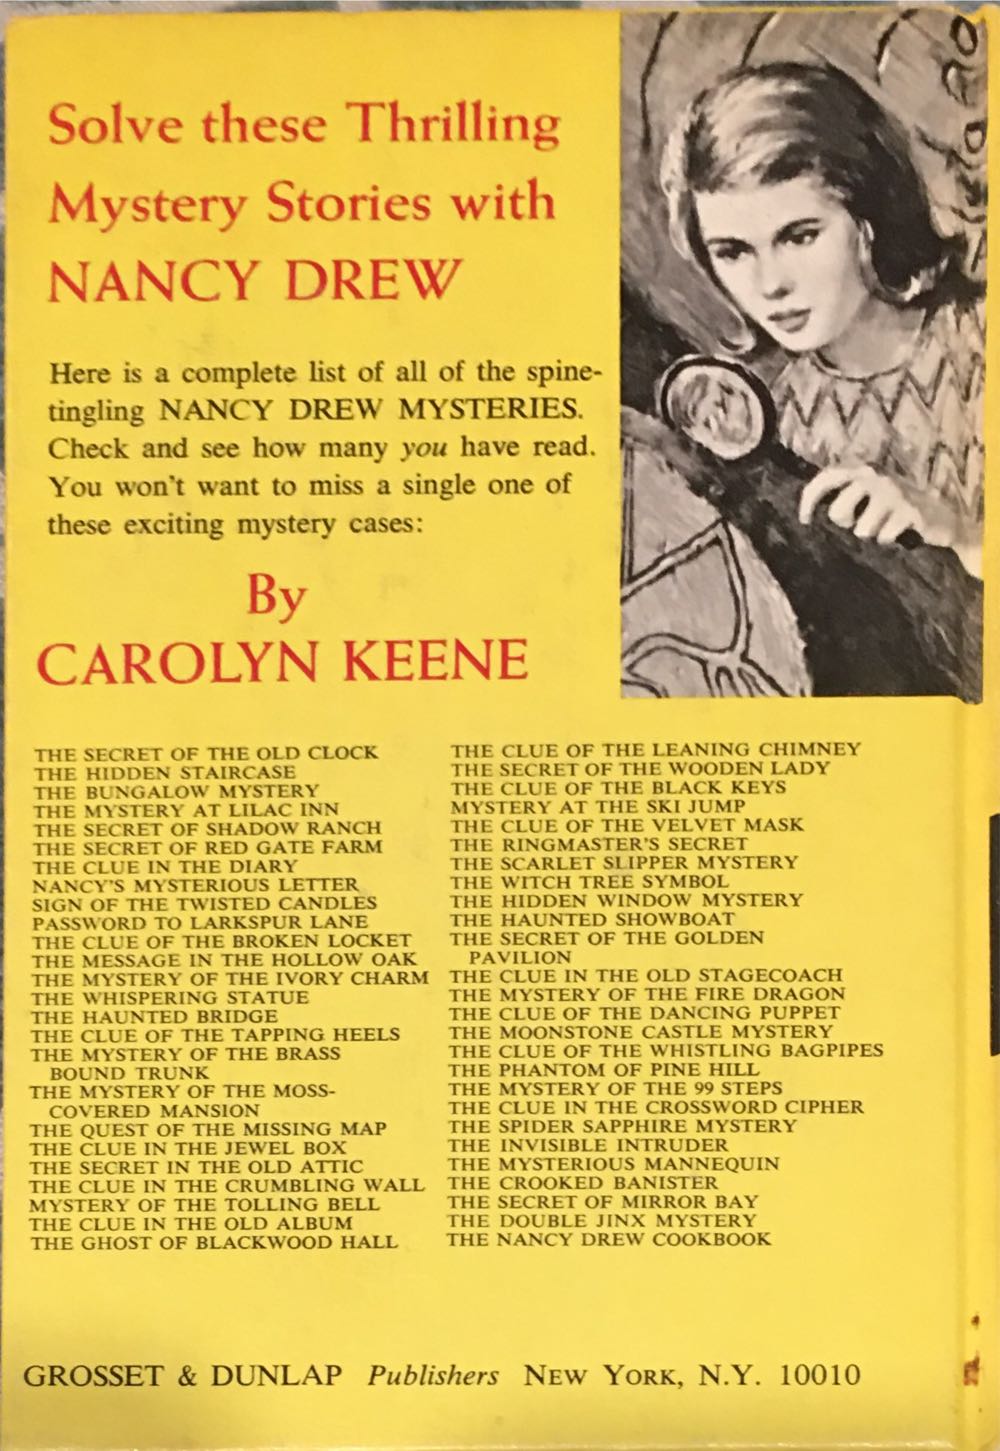 The Crooked Banister (Nancy Drew Mystery Stories, No. 48) - Carolyn Keene (Grosset & Dunlap - Hardcover) book collectible [Barcode 9780448095486] - Main Image 2